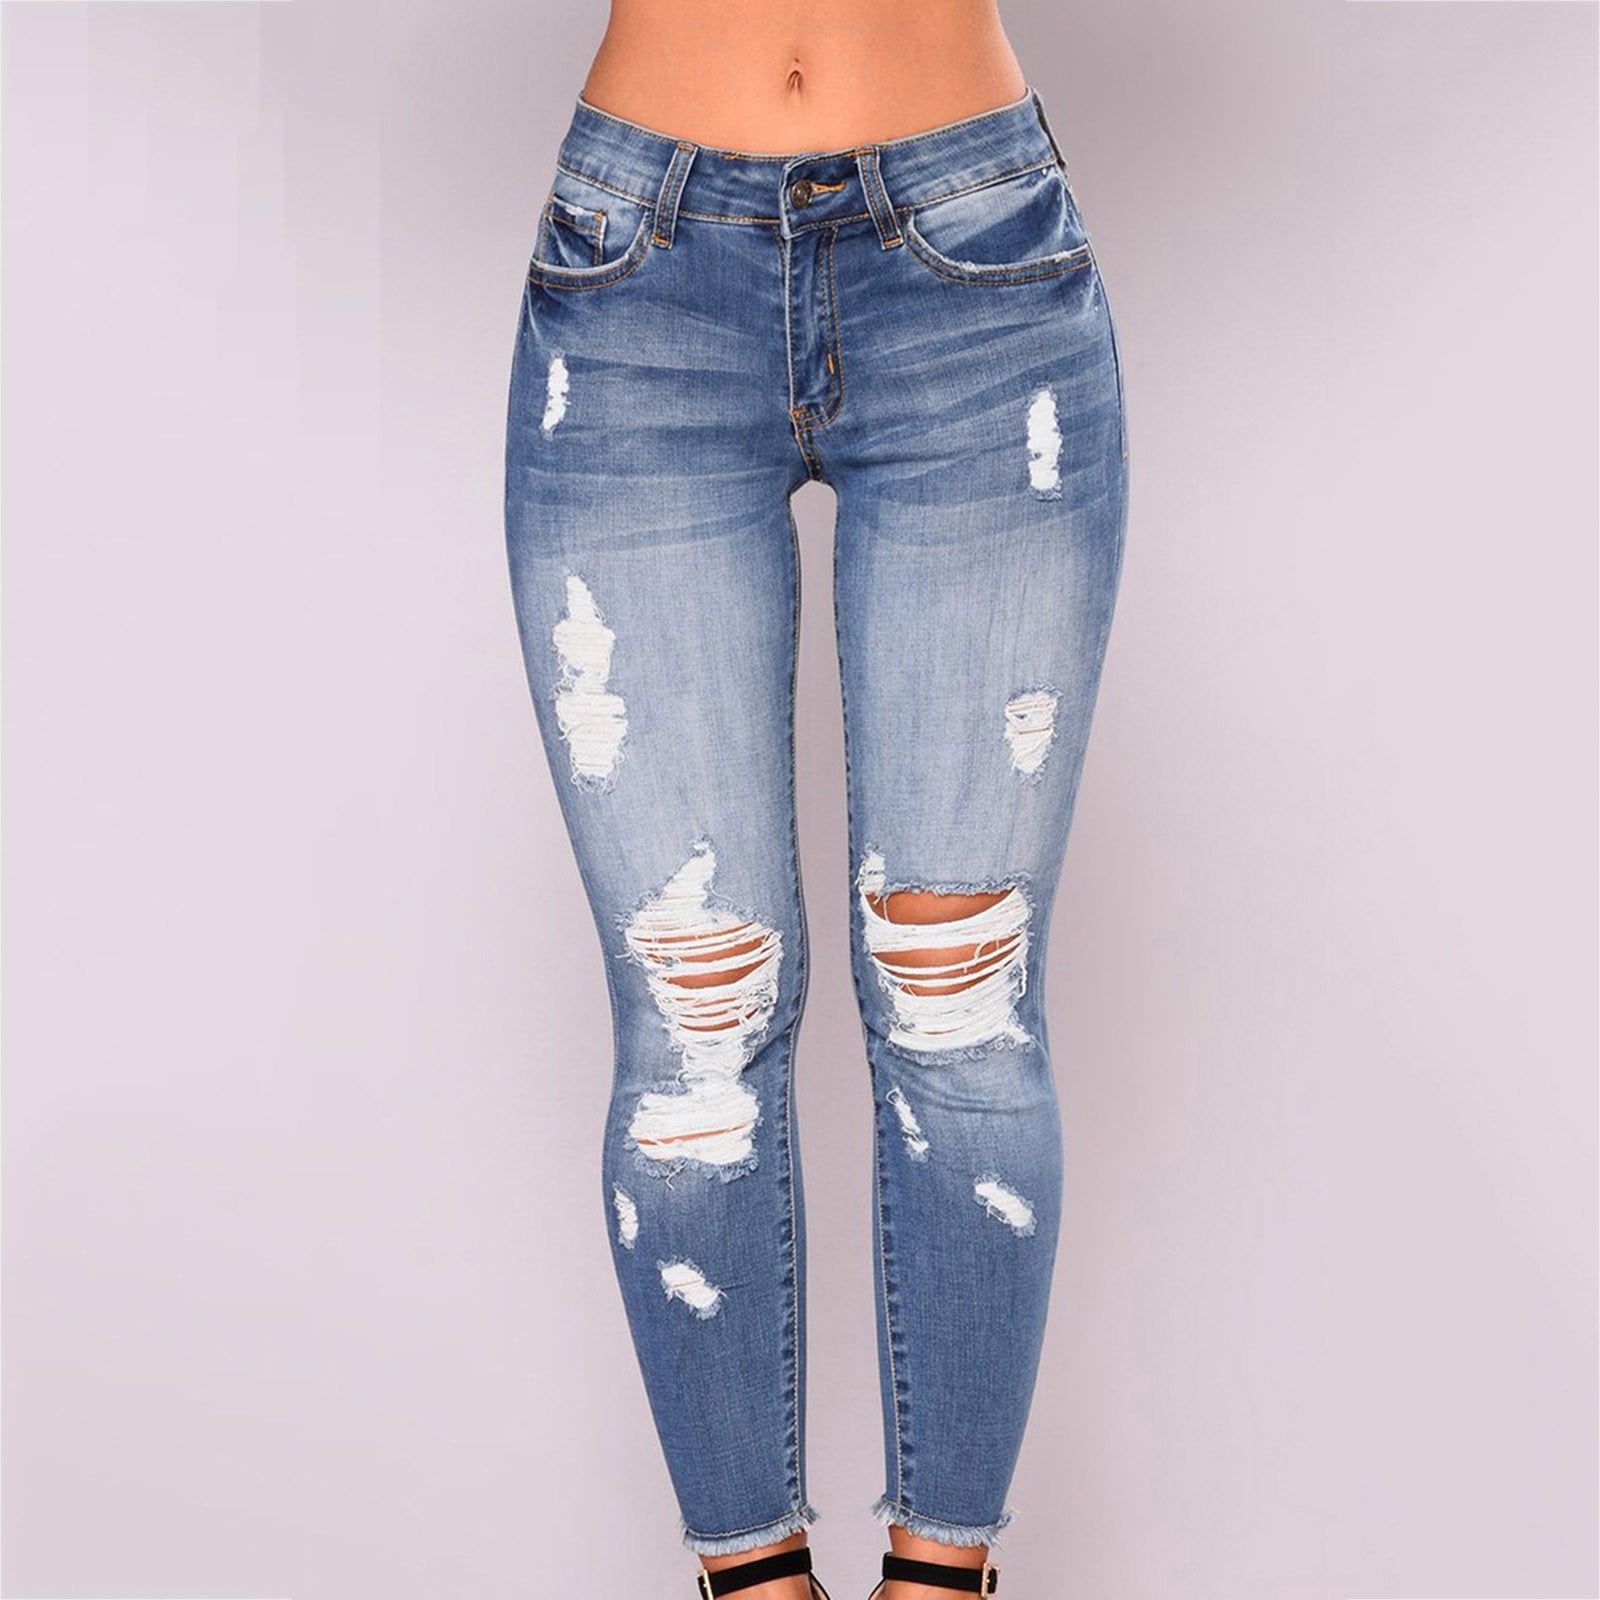 Tummy Control Jeans Stylish High Waist Ripped Jeans for Women Tummy Control  Butt-lifted Slim Fit Ankle Length Pants Trendy Streetwear Trousers Zippered  Buttoned Jeans